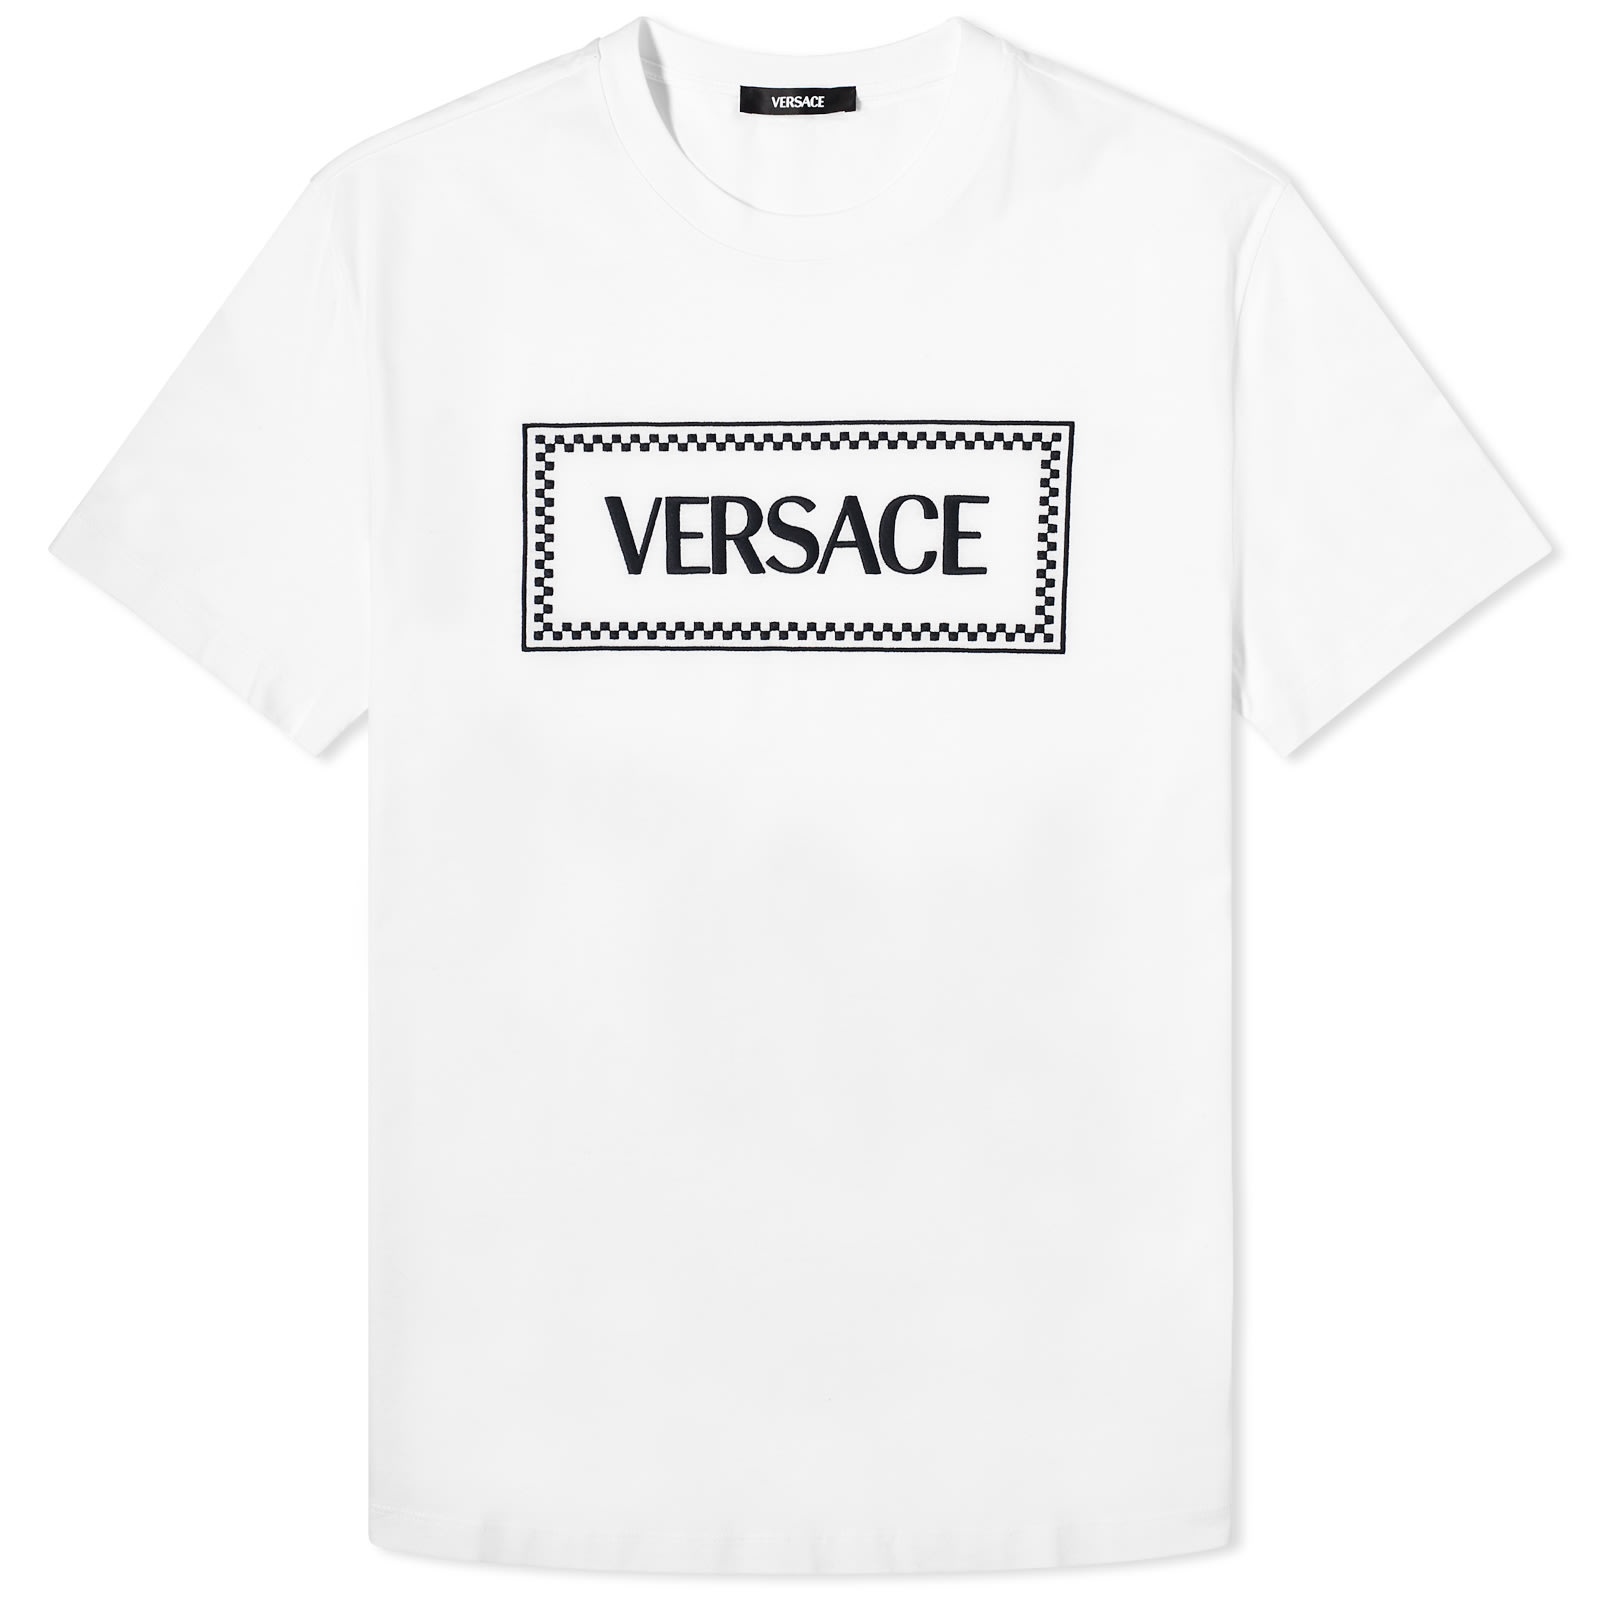 Versace Tiles Embroidered Tee - 1